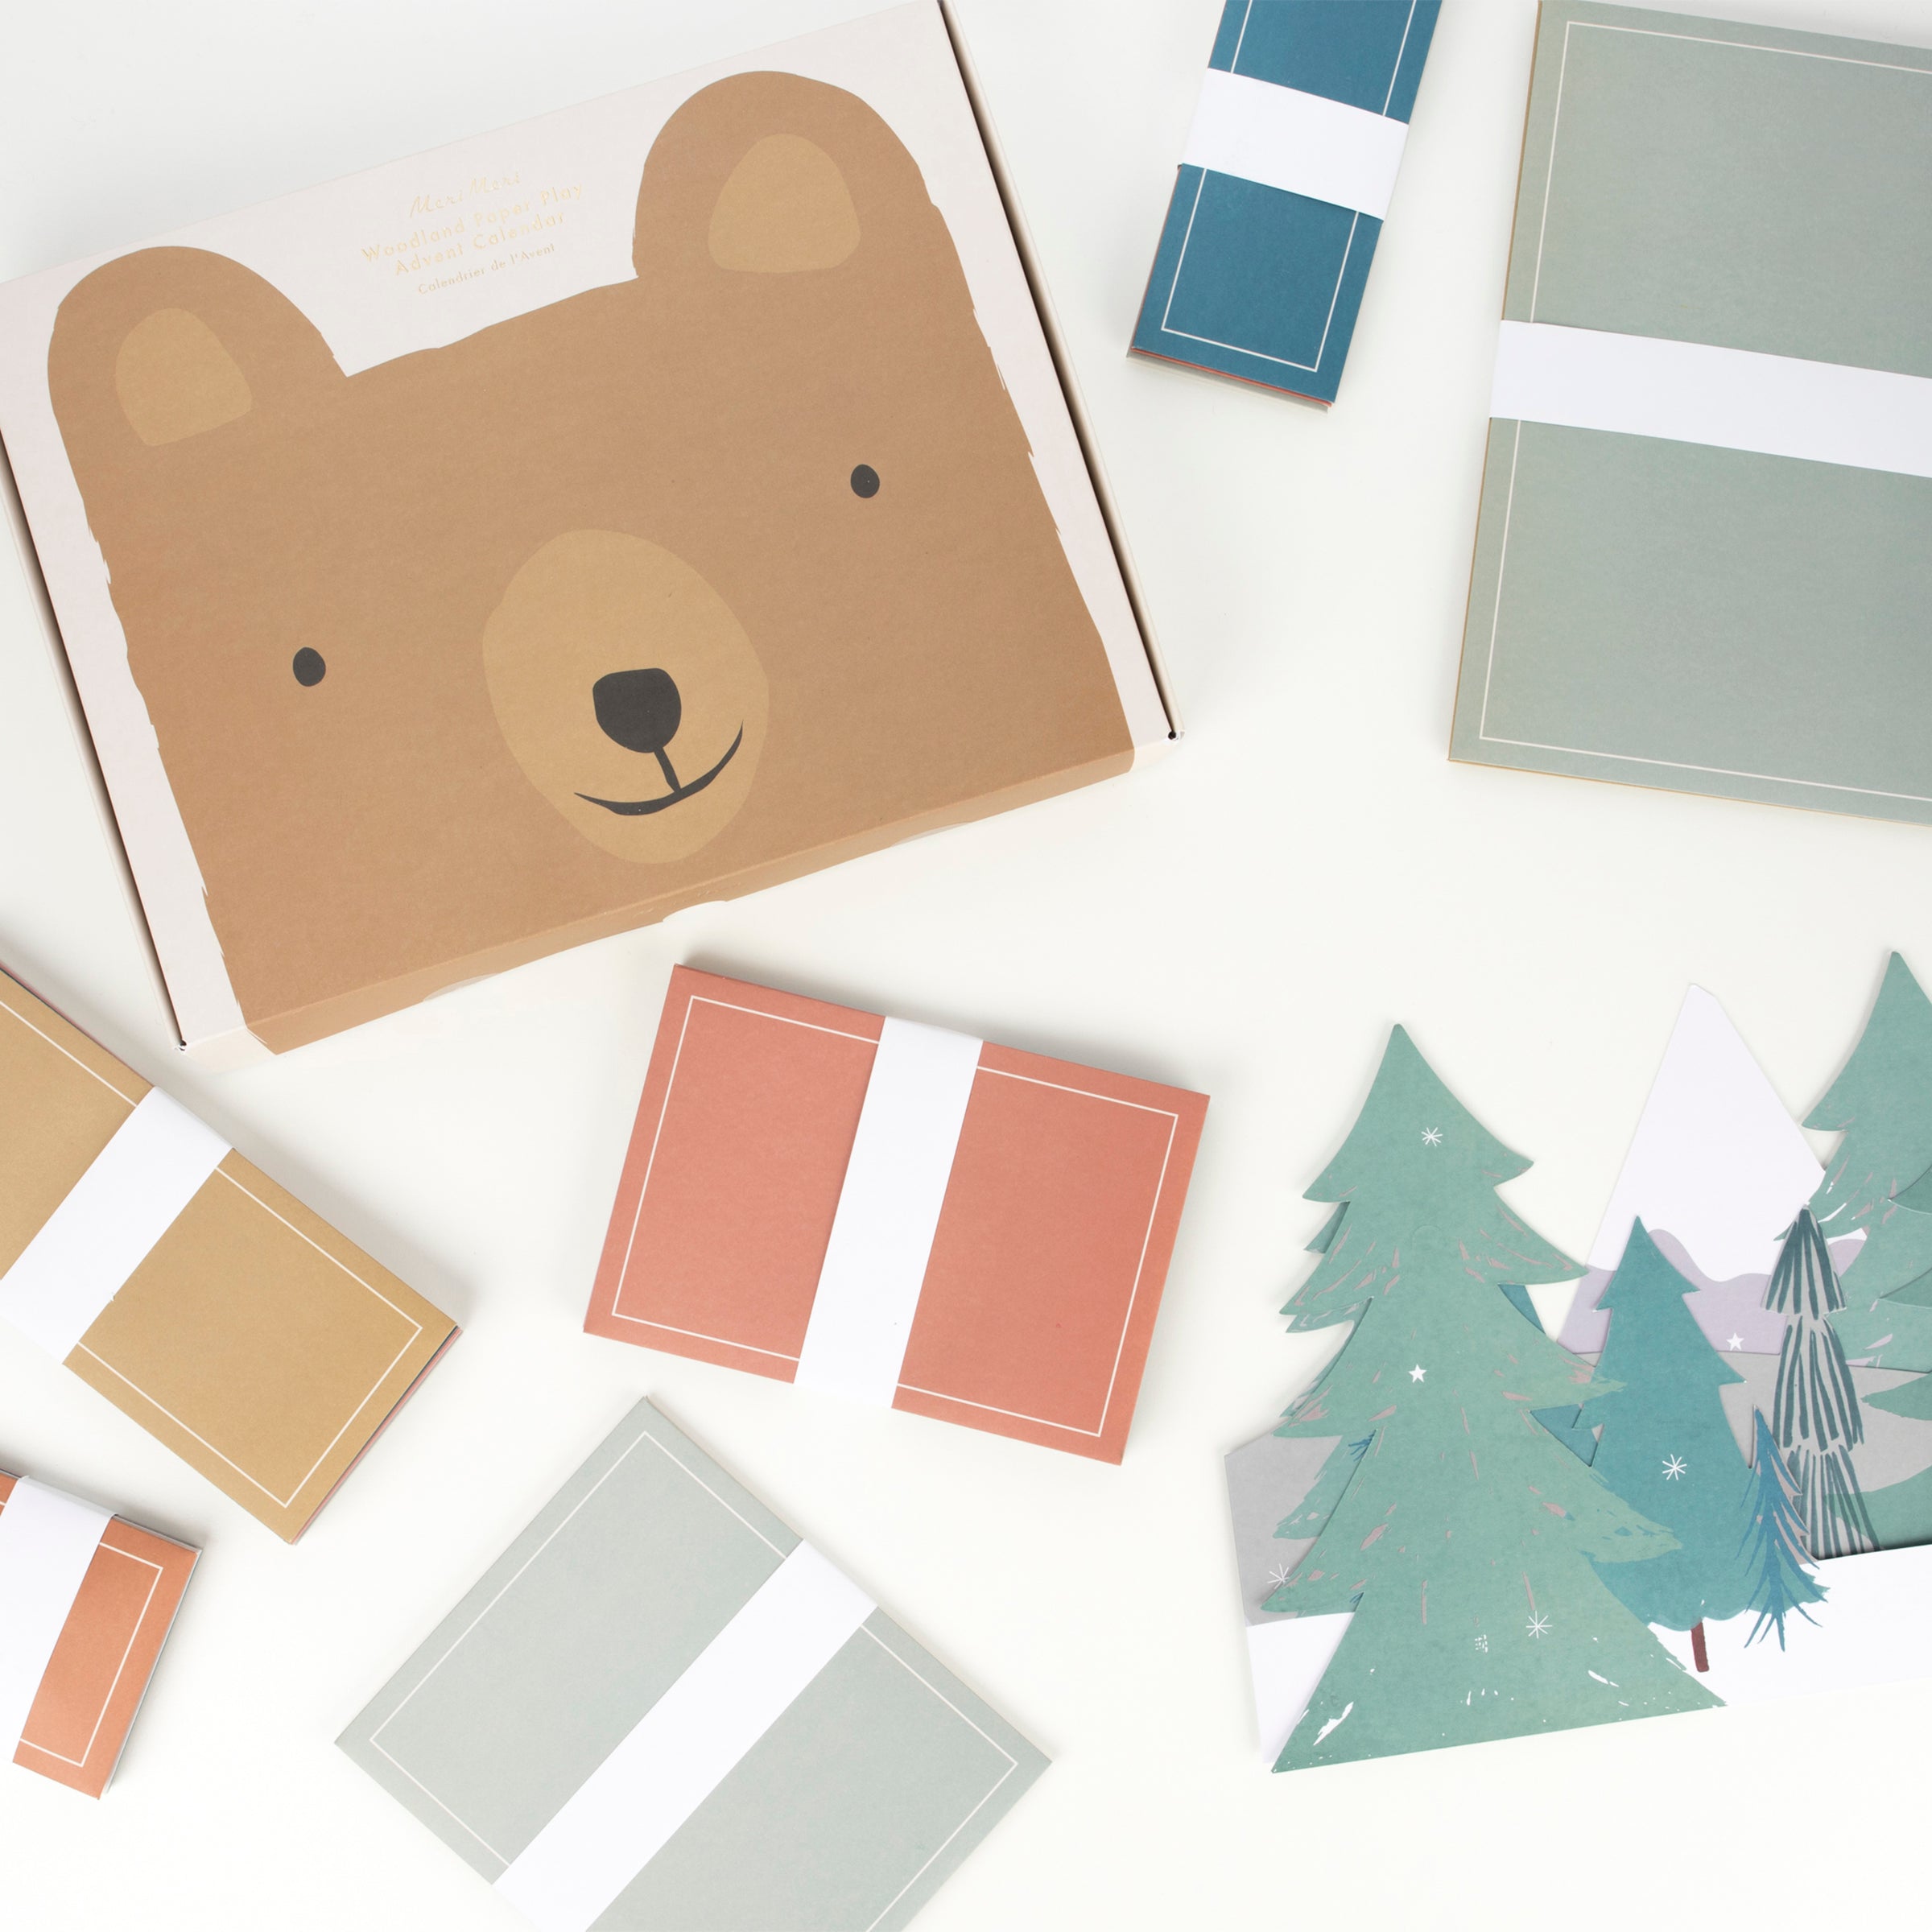 This very special kids advent calendar features paper animals for lots of fun.